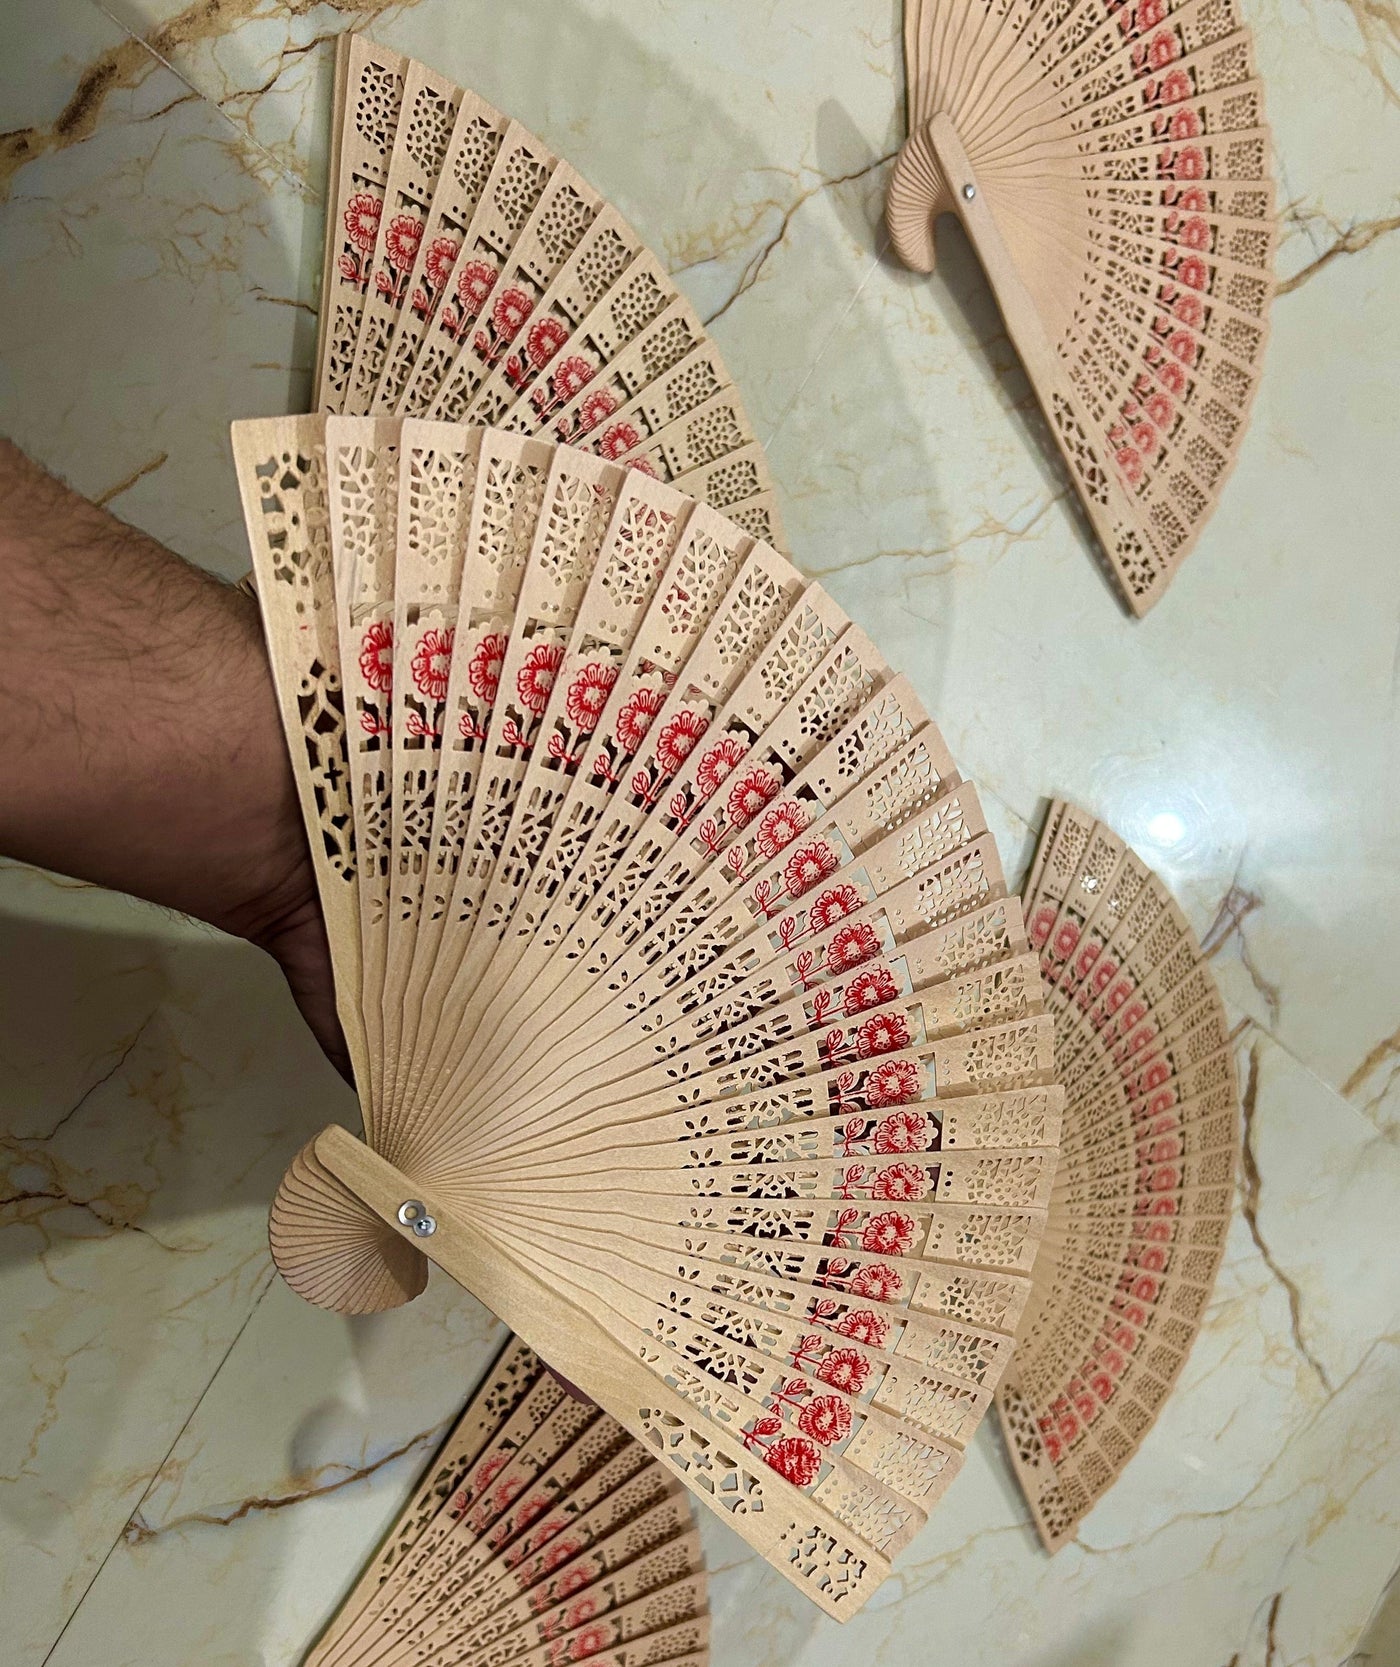 100 Rs each on buying 50+ pcs / WhatsApp at 8619550223 LAMANSH bamboo floral 🌸 printed hand fans for wedding Favours 🎁 and return gifts for bridesmaids